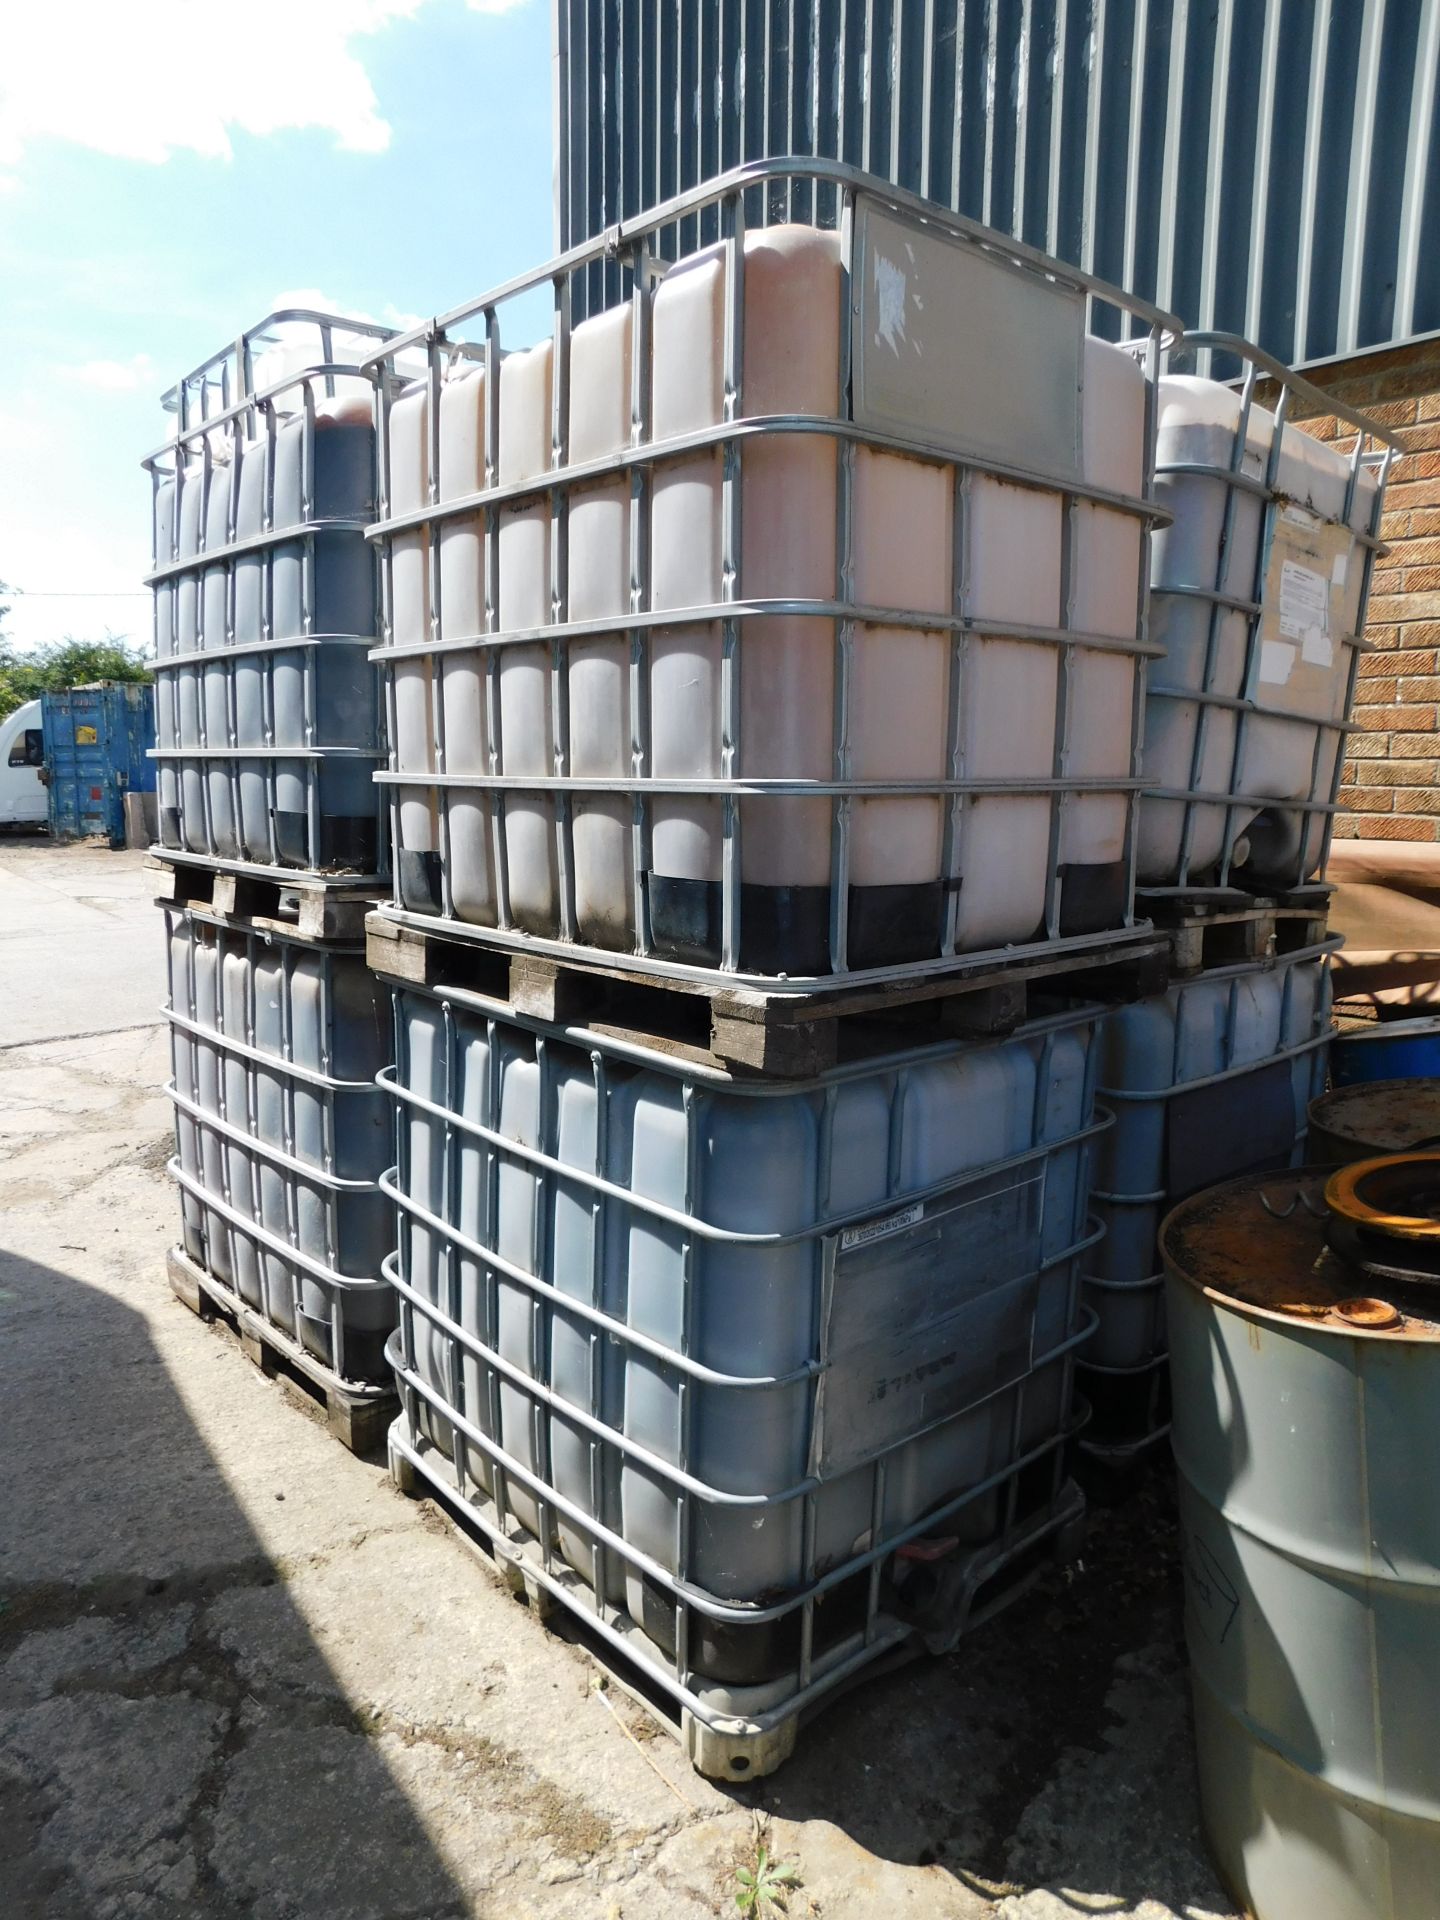 8 IBV Containers & Contents of Waste Water (Location: Bristol. Please Refer to General Notes)